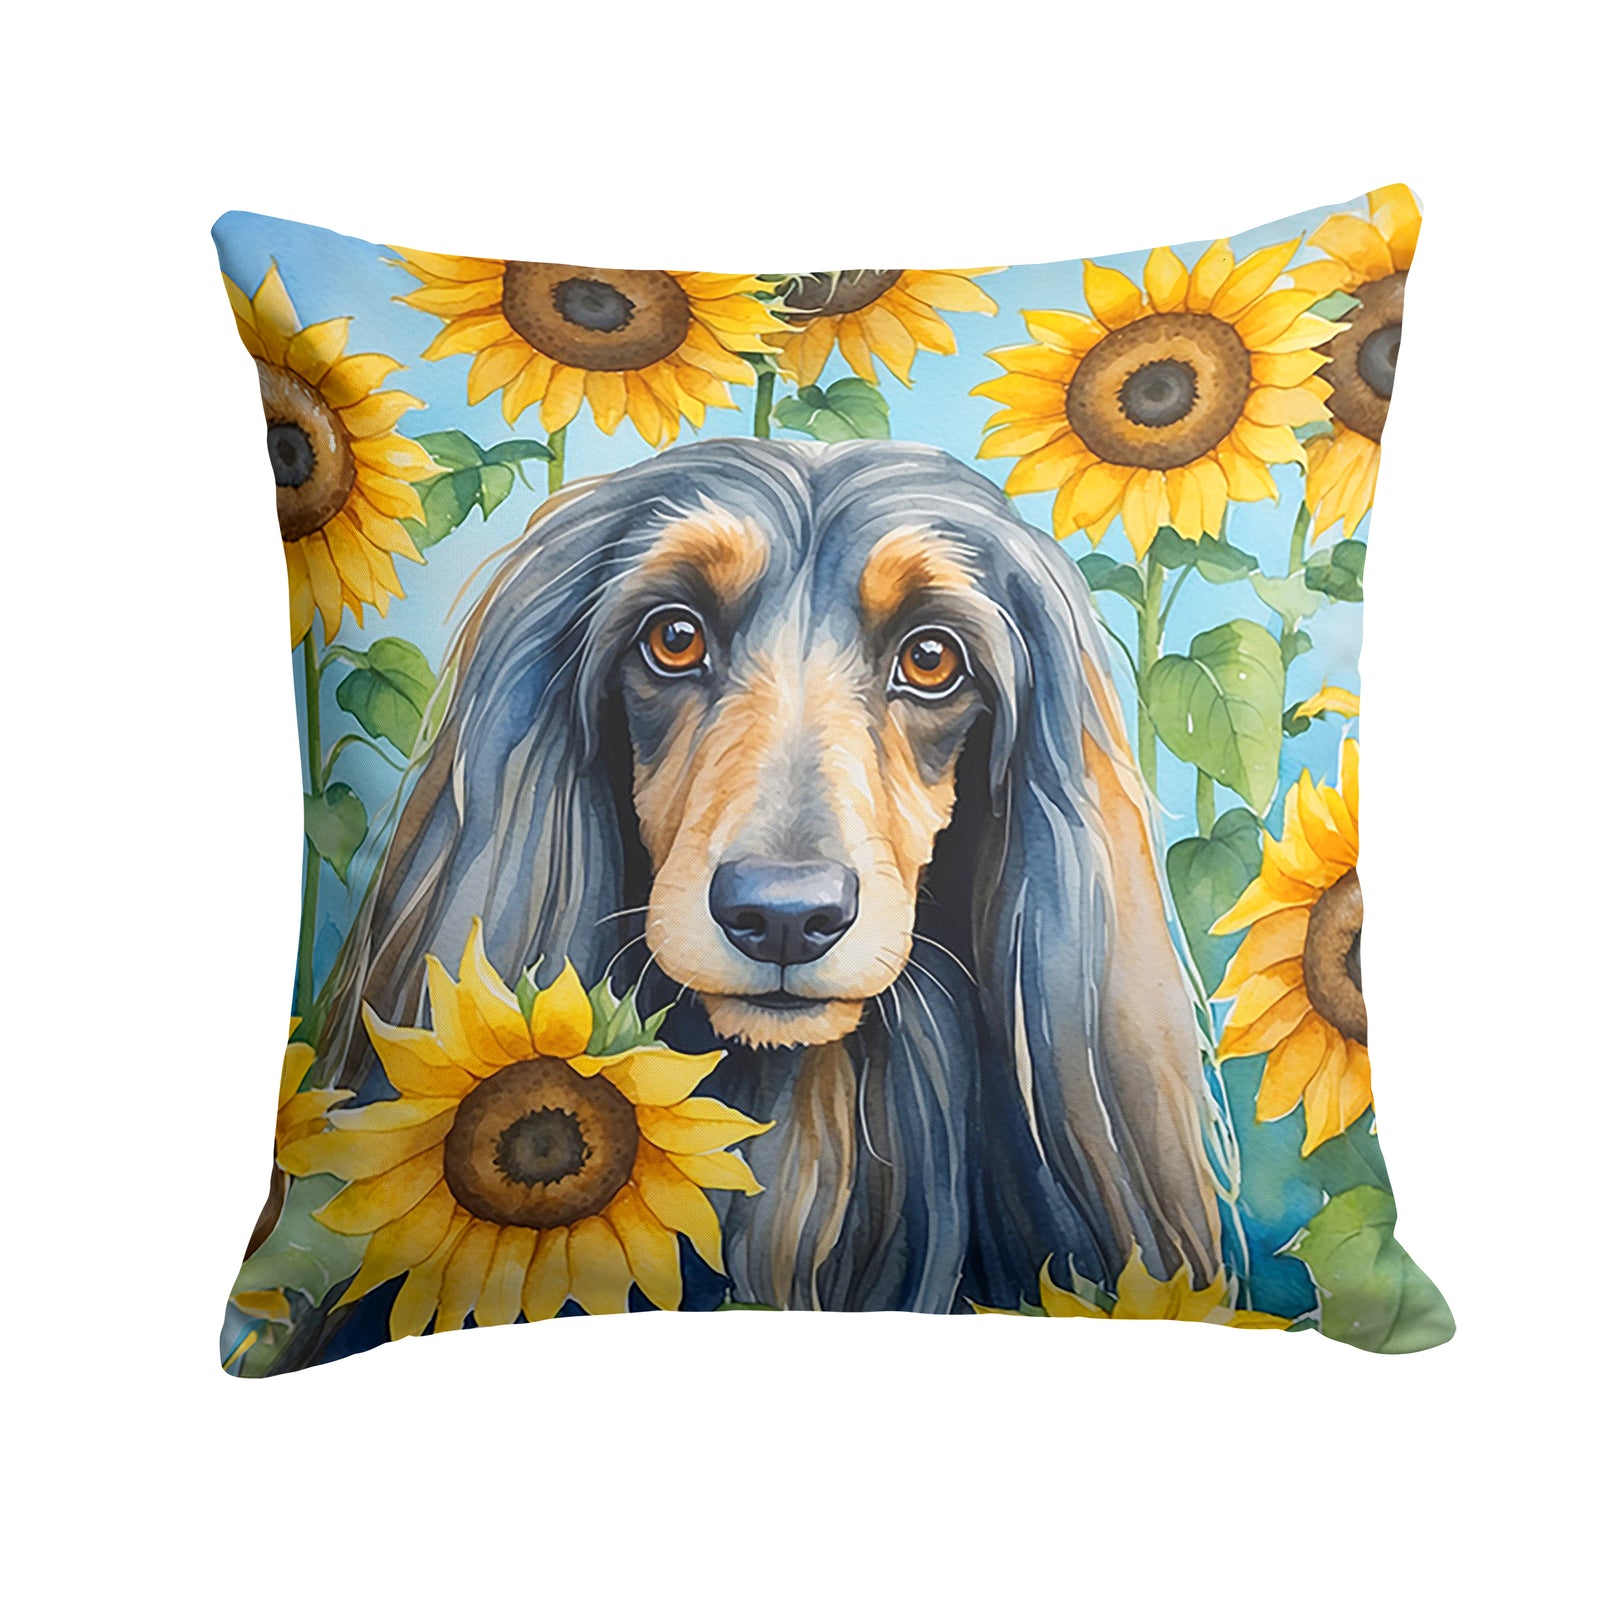 Buy this Afghan Hound in Sunflowers Throw Pillow